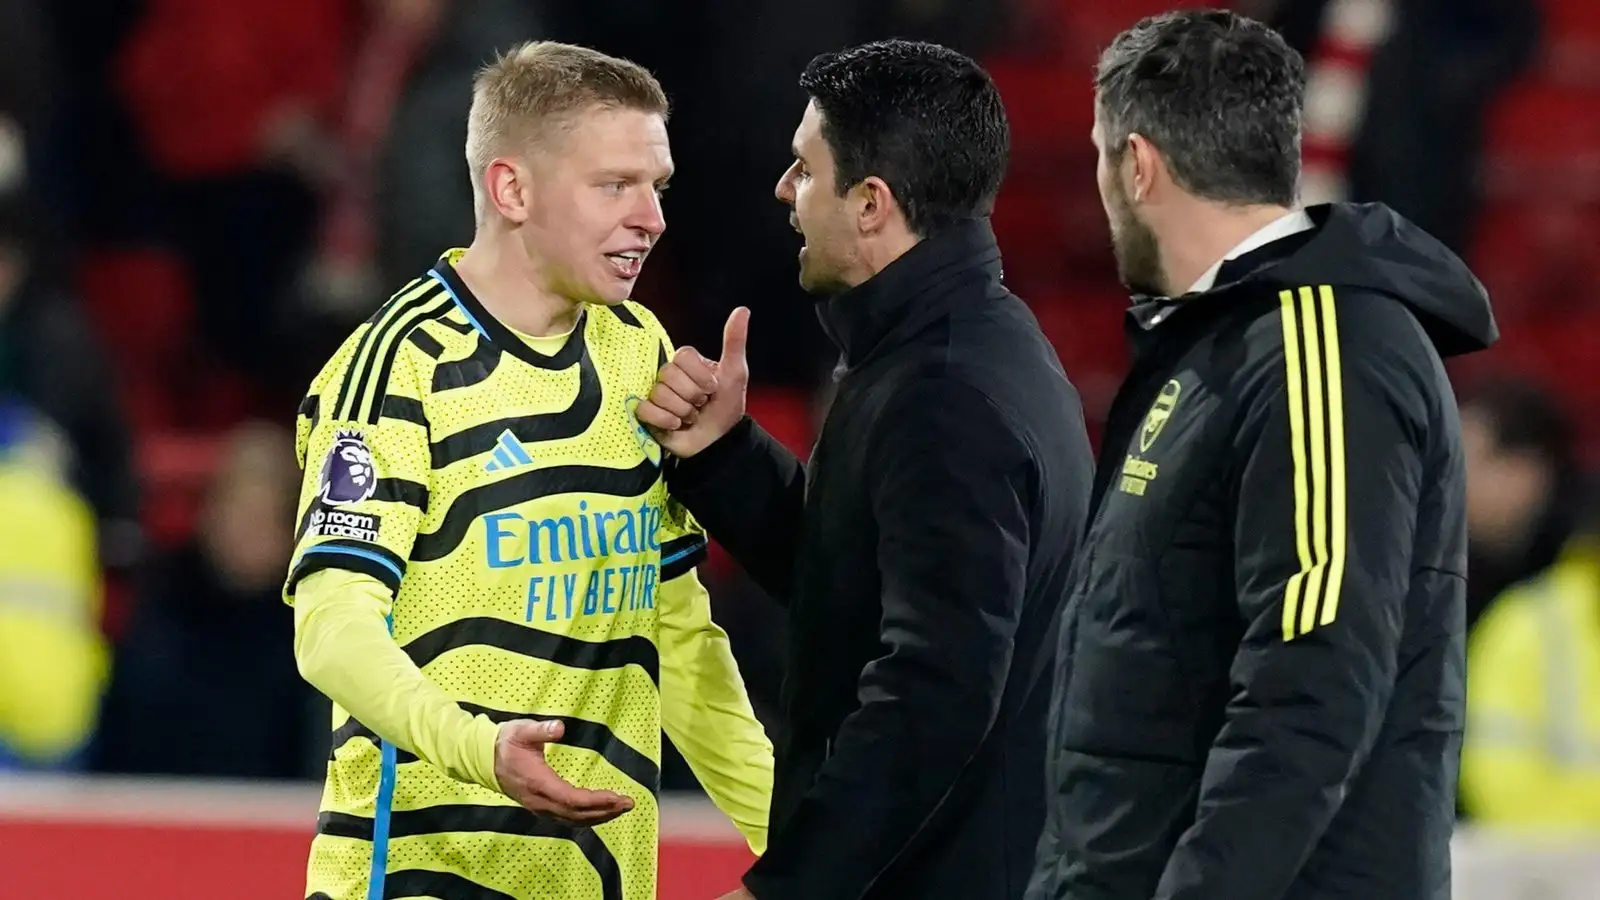 Arsenal protector Oleksandr Zinchenko is relaxed down by Mikel Arteta after the full-time whistle.